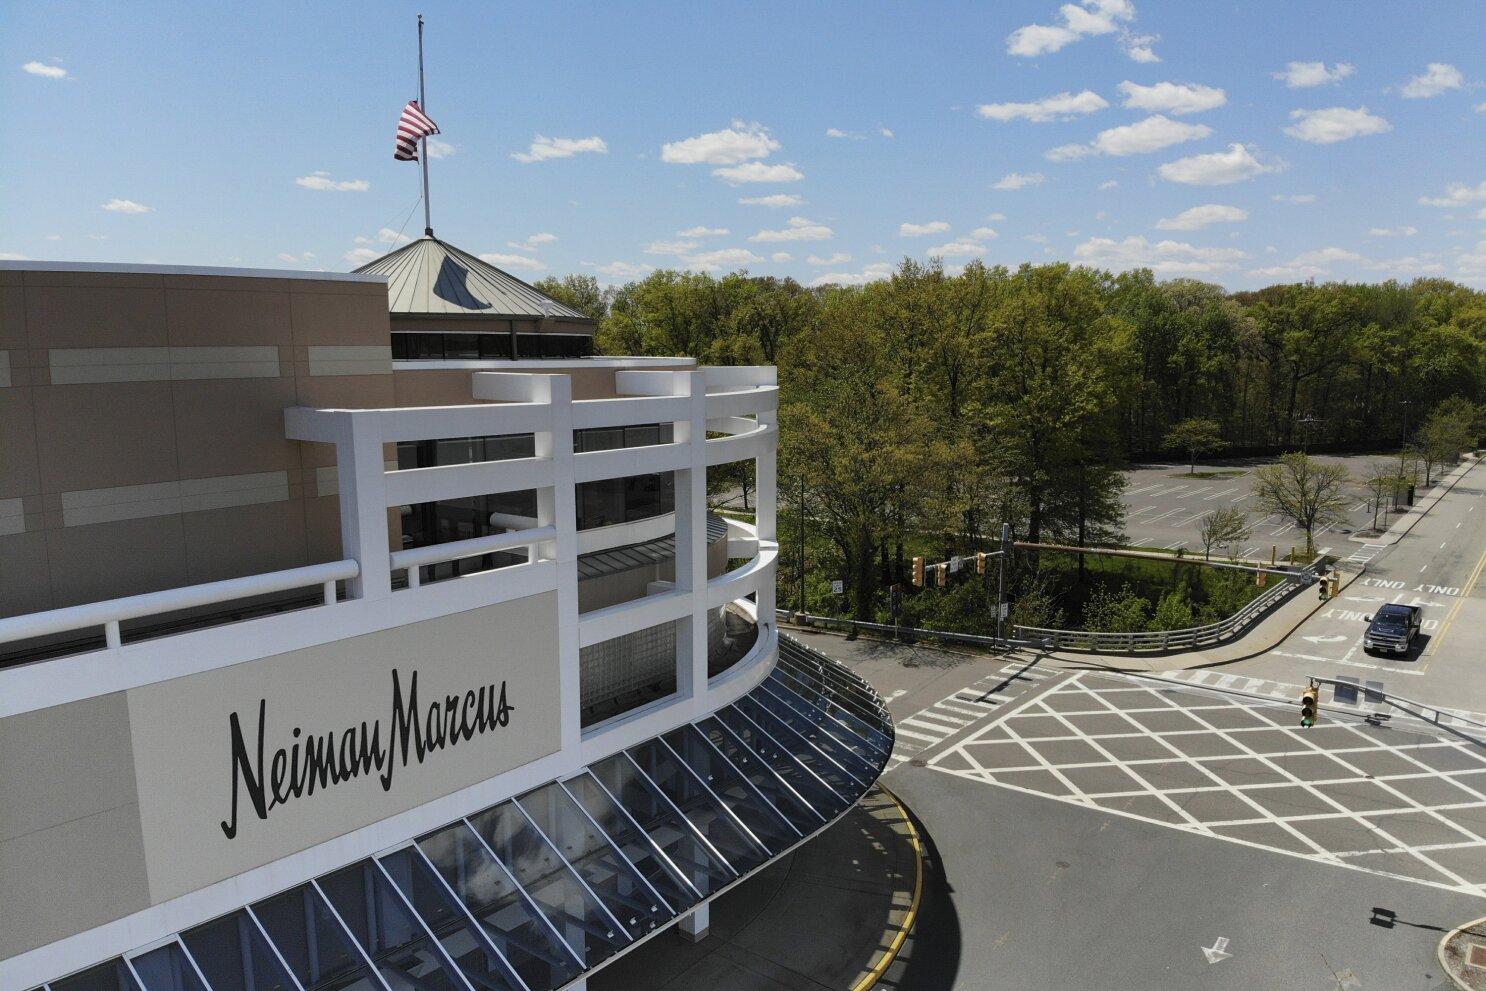 Can Neiman Marcus Survive Bankruptcy?